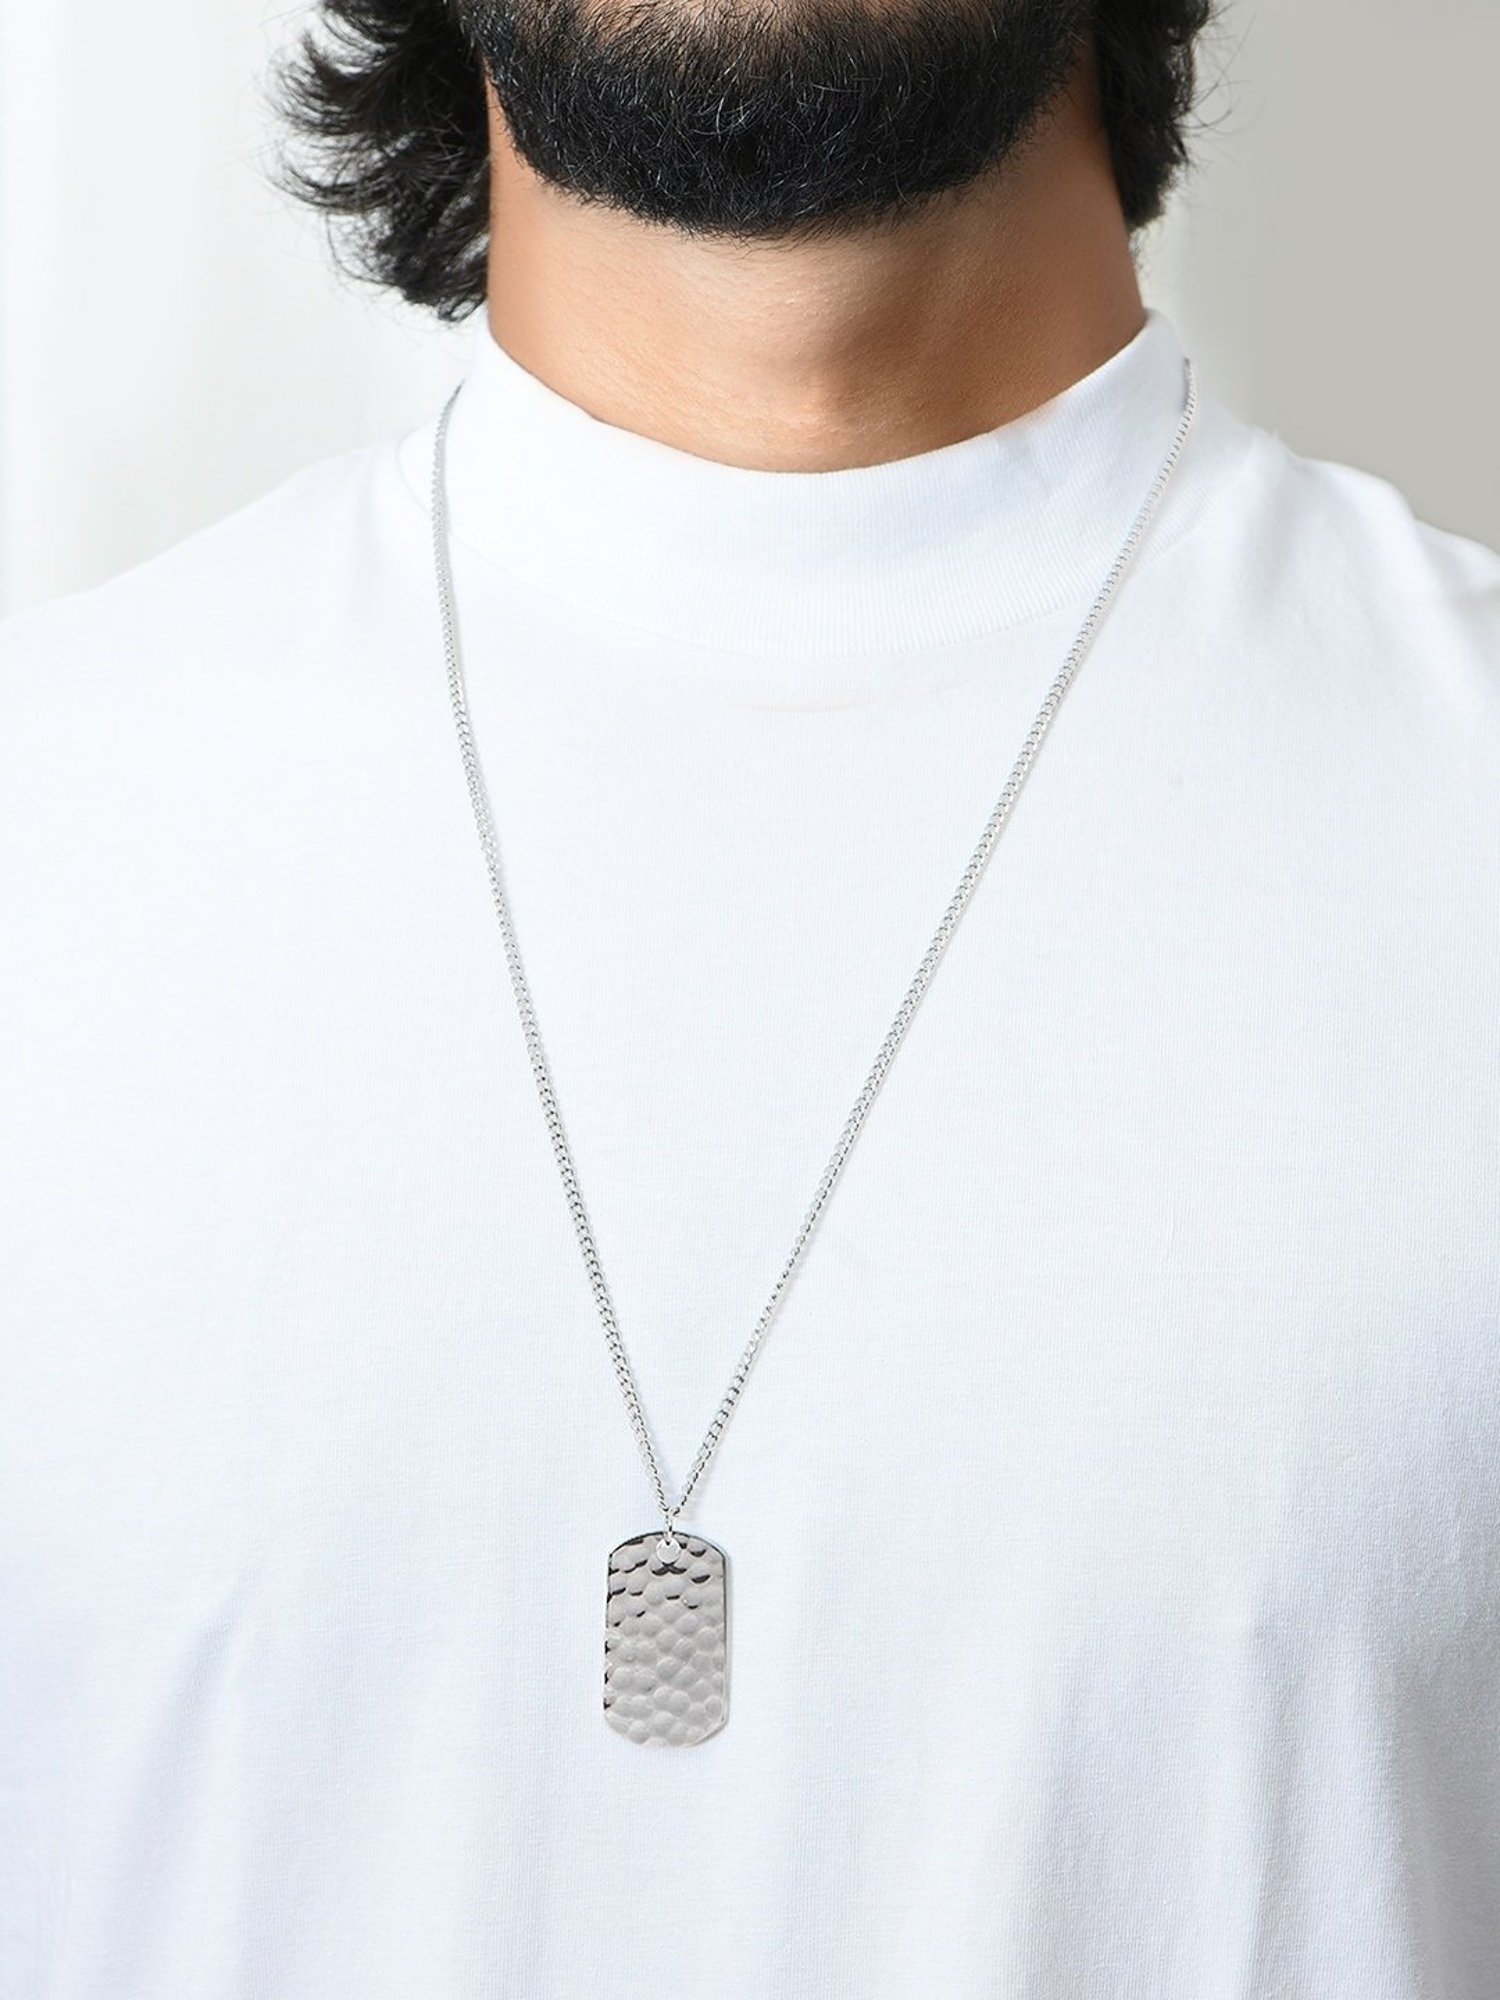 14k Gold Mens Small Dog Tag Necklace - Zoe Lev Jewelry